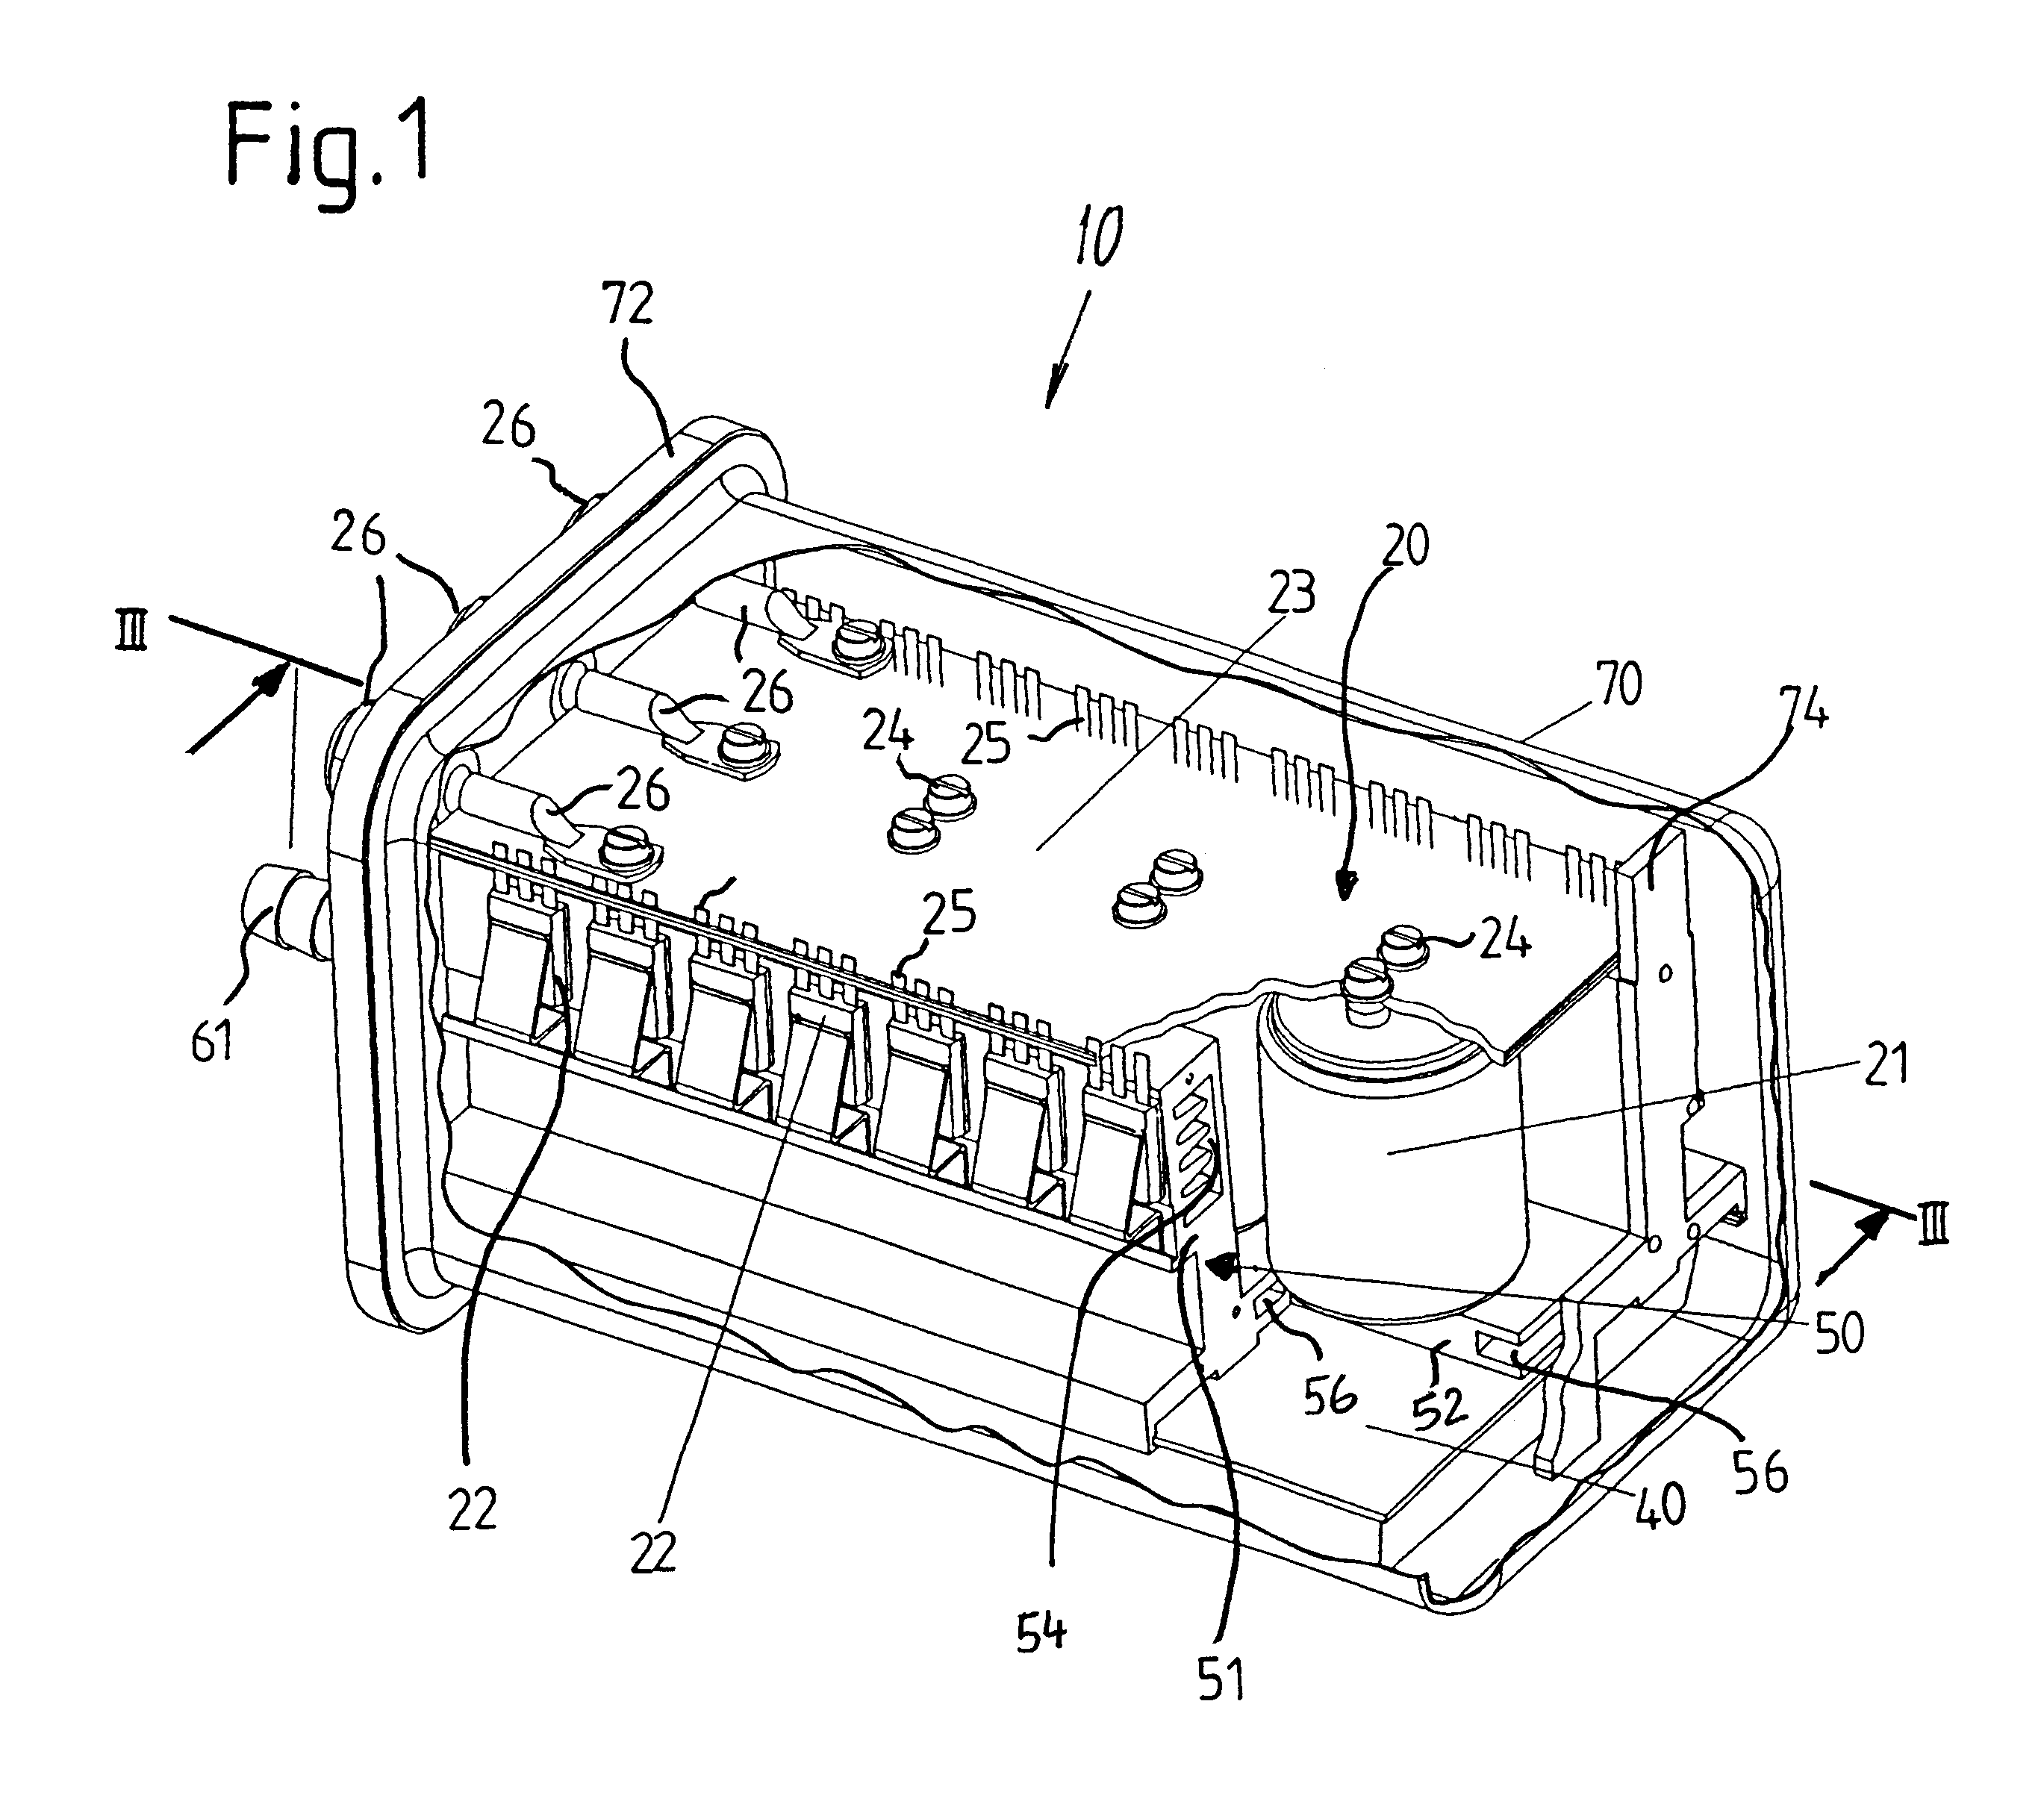 Power electronics device for controlling an electric machine